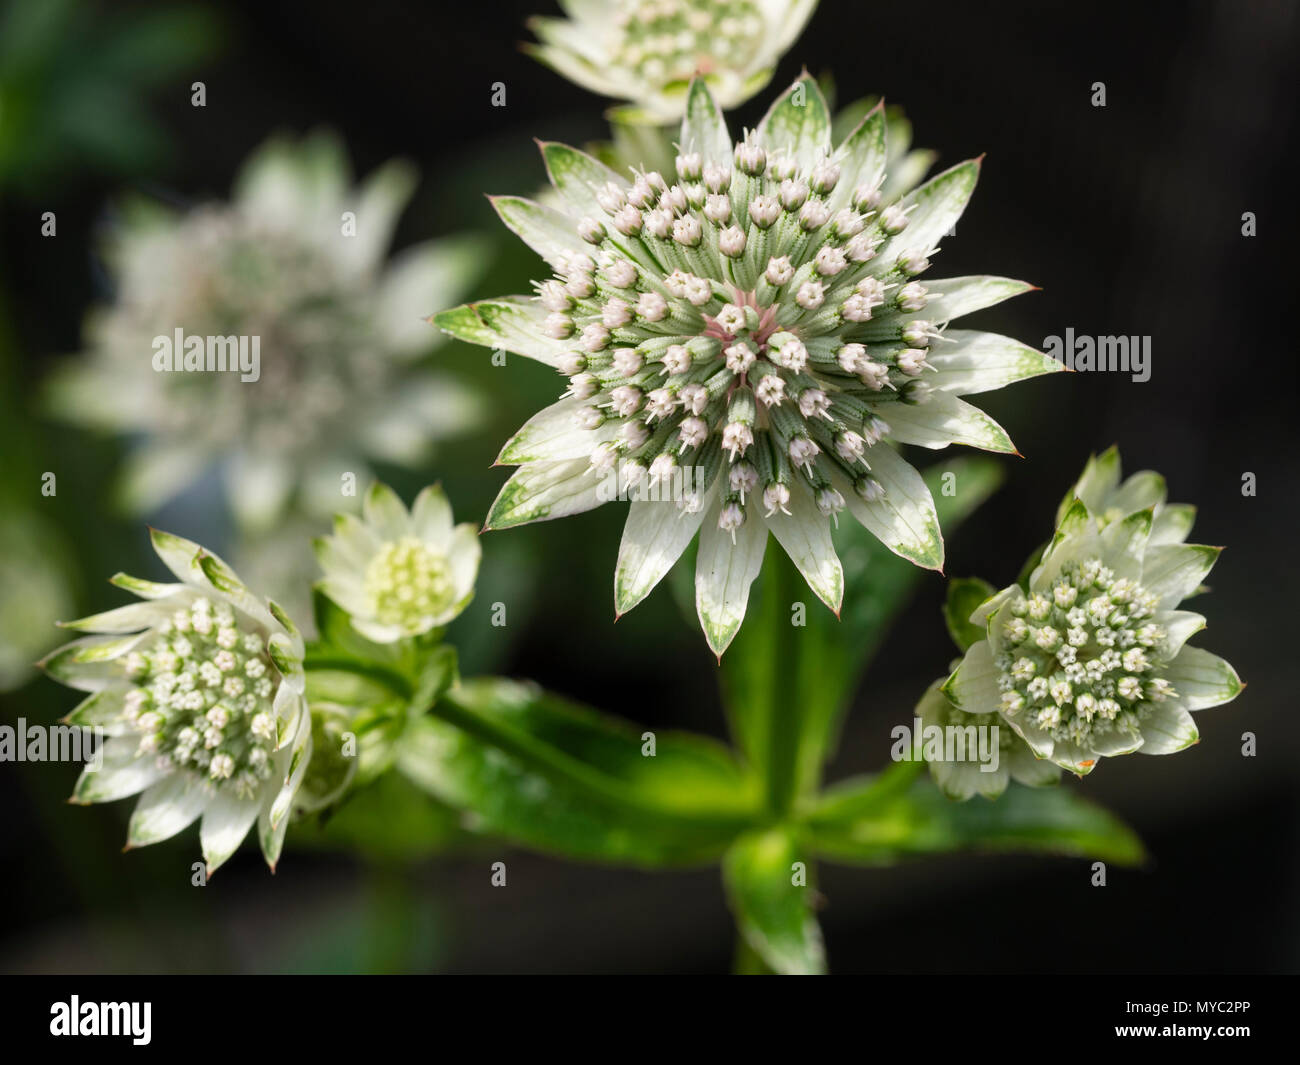 Green tipped white bracts enfold the cluster of small individual flowers of the summer blooming masterwort, Astrantia major 'Star of Billion' Stock Photo